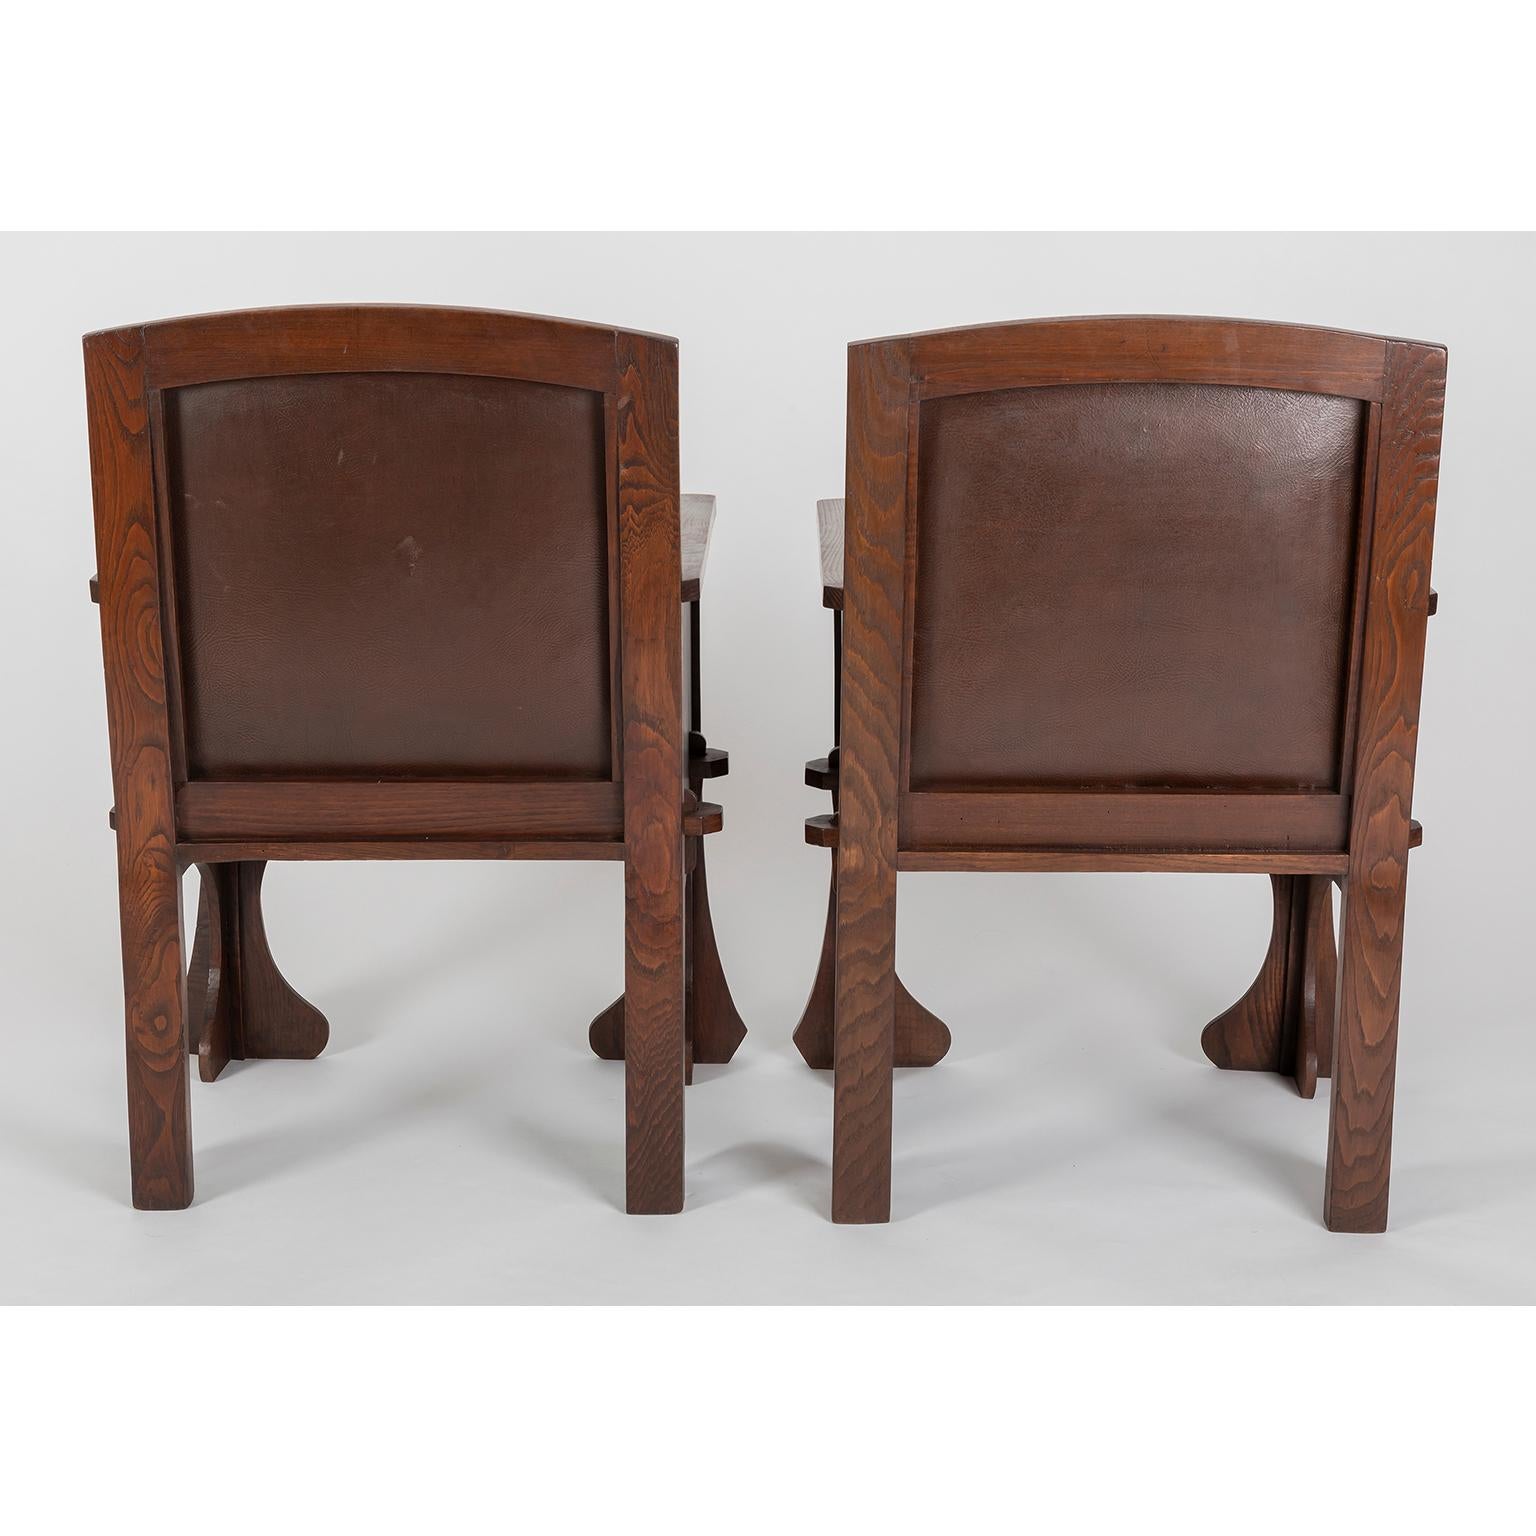 Set of Four Portuguese Country Rustic Style Chairs in Solid Hardwood and Leather For Sale 1